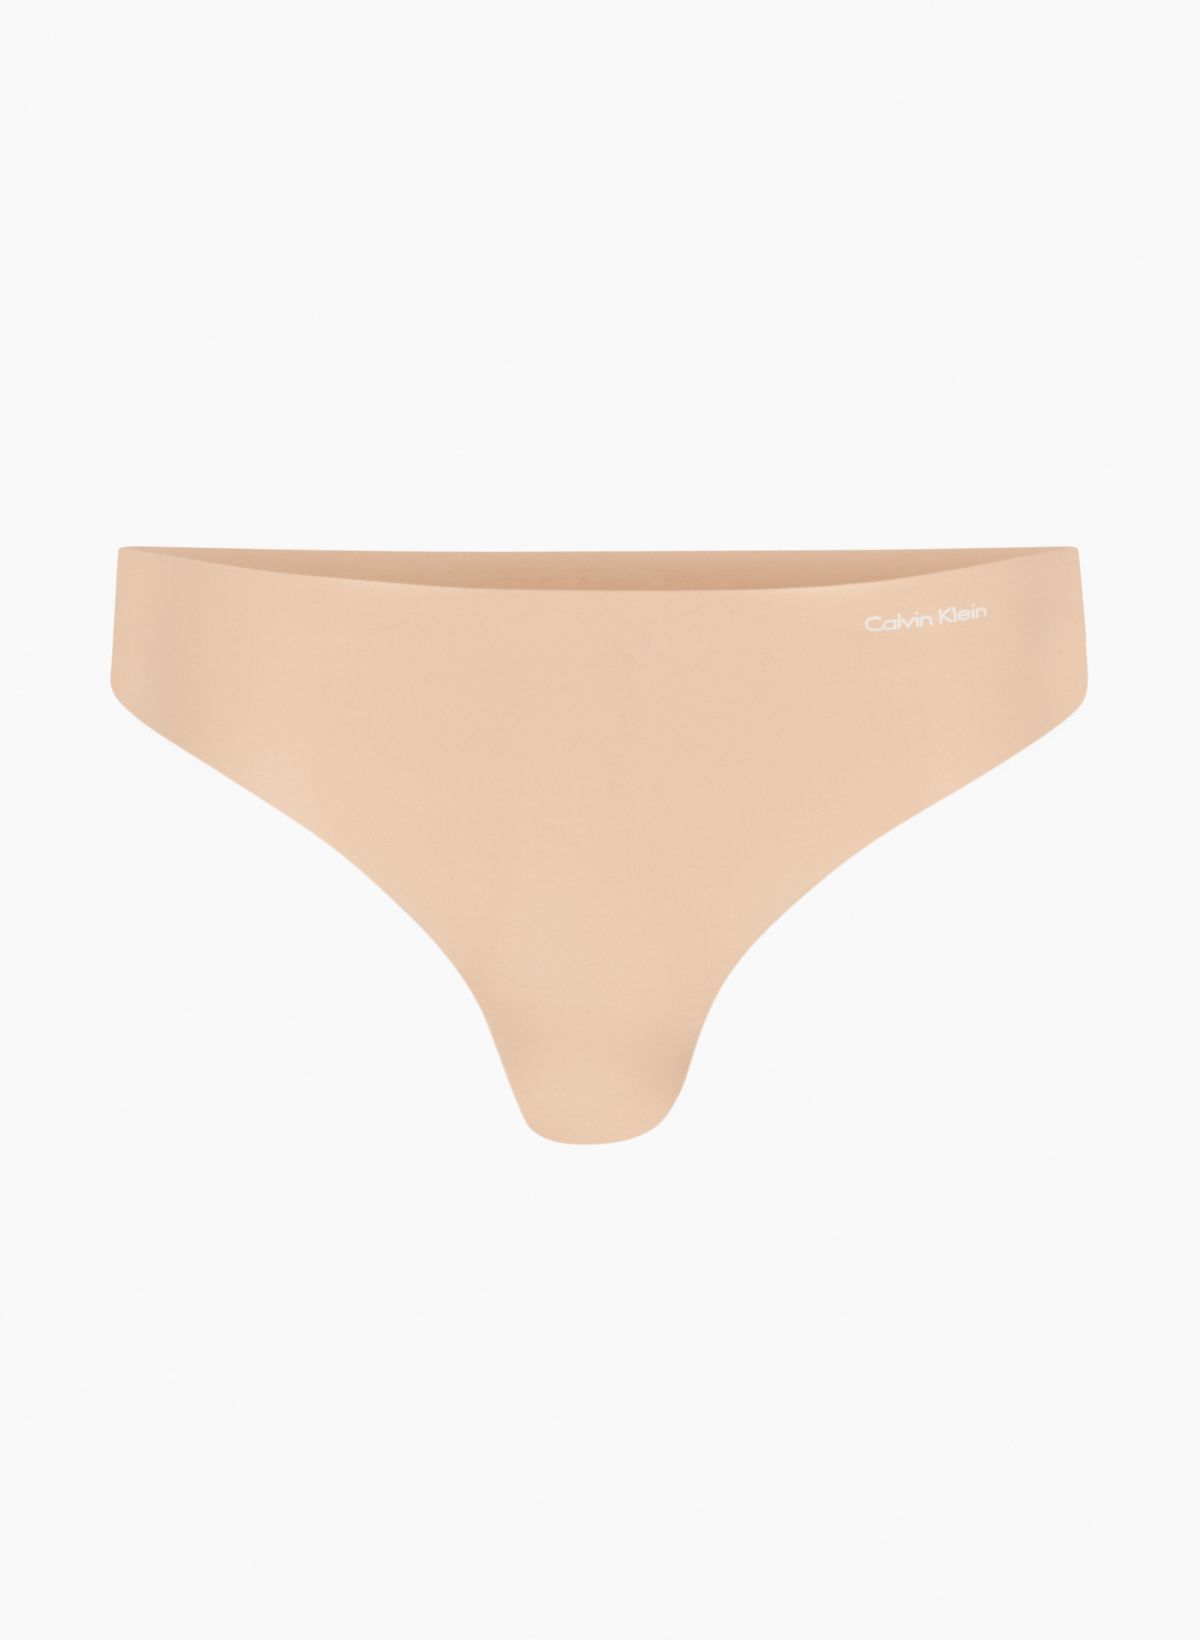 Calvin Klein Invisibles Thong 3 Pack In Beige Multi